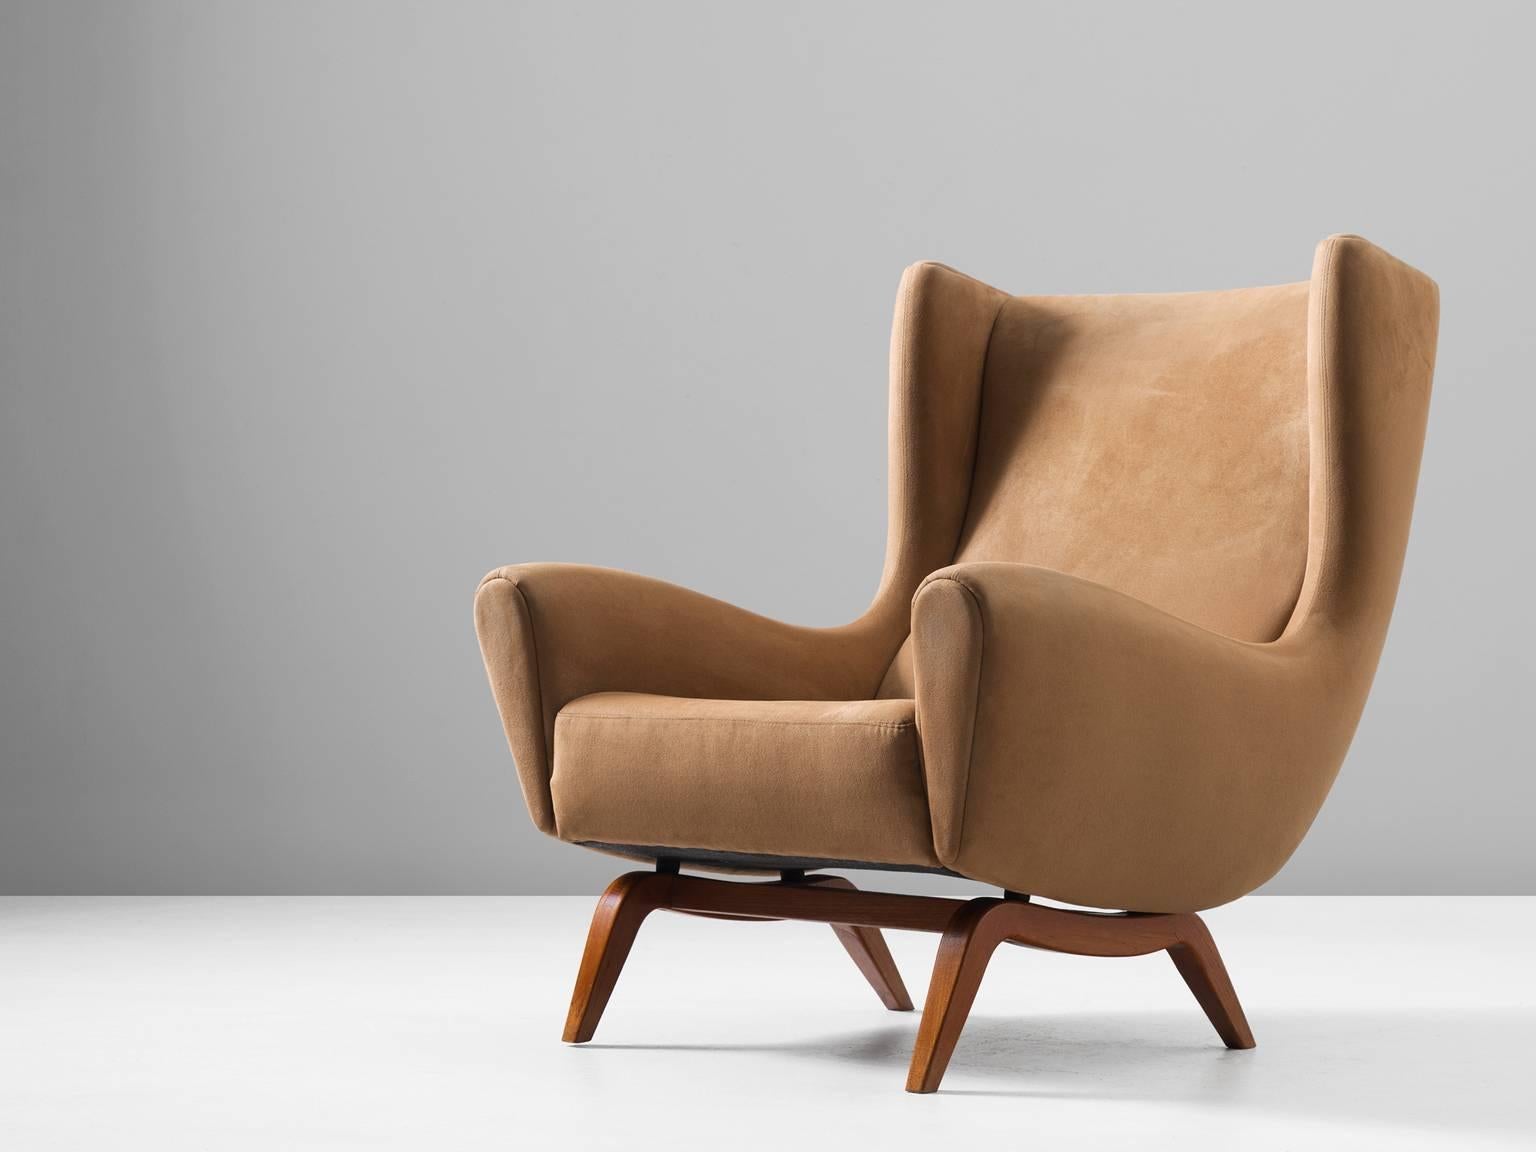 Lounge chair model 110 in teak and fabric, by Illum Wikkelsø for Søren Willadsen, Denmark, 1950s. 

This well-designed armchair shows an unusual elegance and great eye for detail, combined with outstanding craftsmanship, which is characteristic